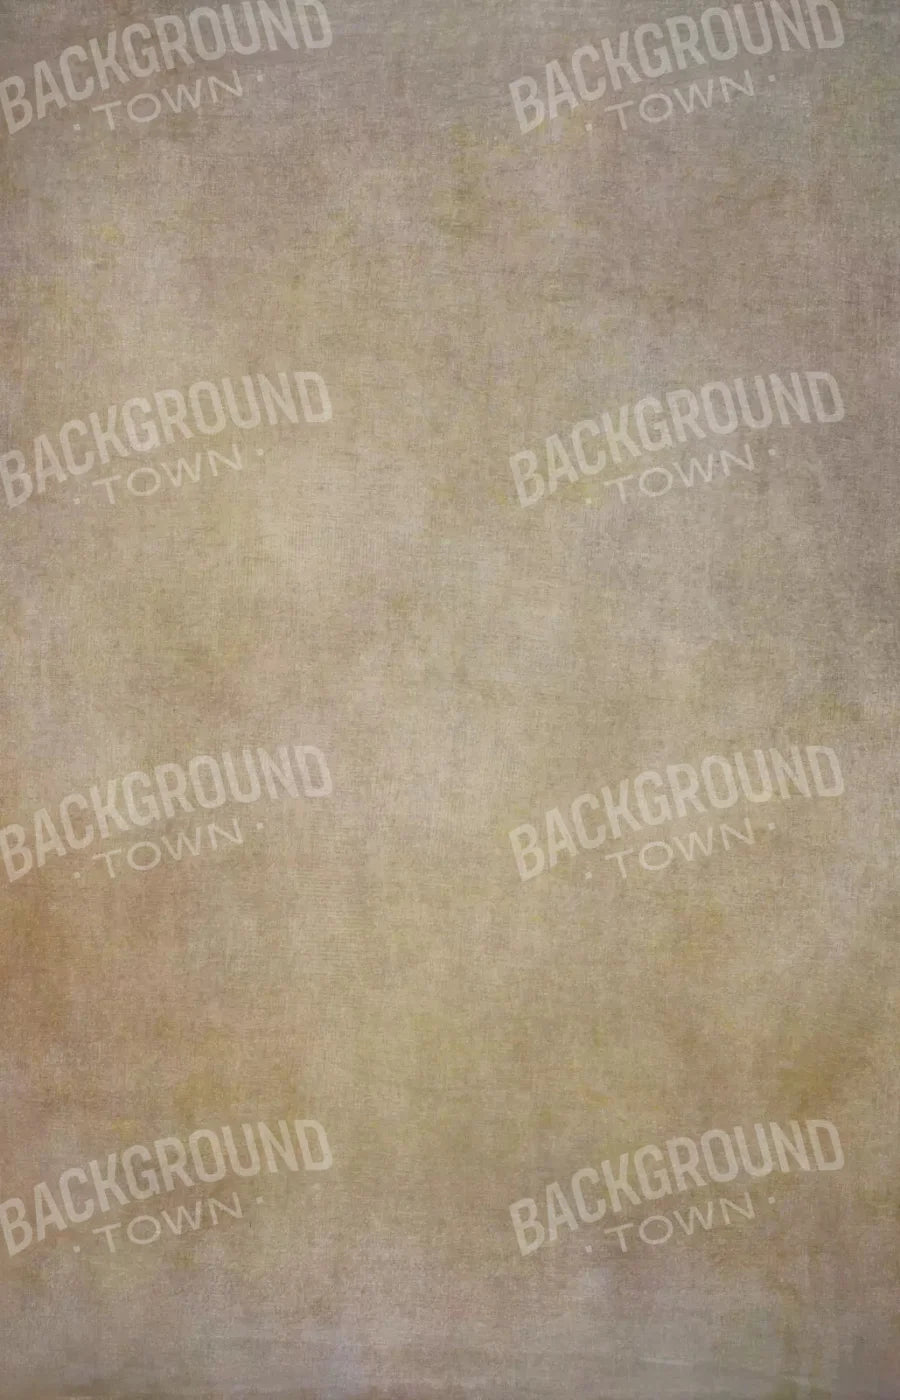 Classic Texture Soft Brown 8X12 Ultracloth ( 96 X 144 Inch ) Backdrop